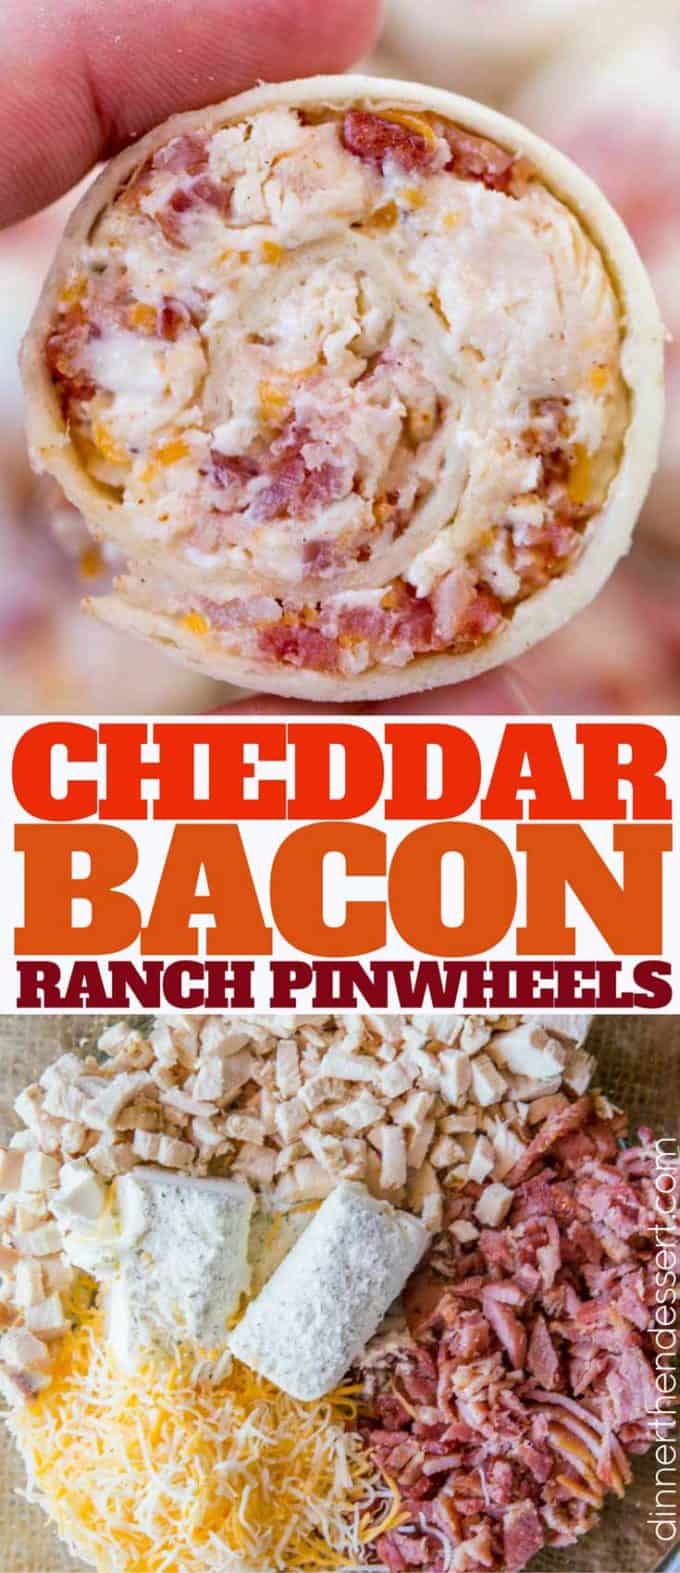 Cheddar Bacon Ranch Pinwheels are the perfect afternoon snack! You'll love them!